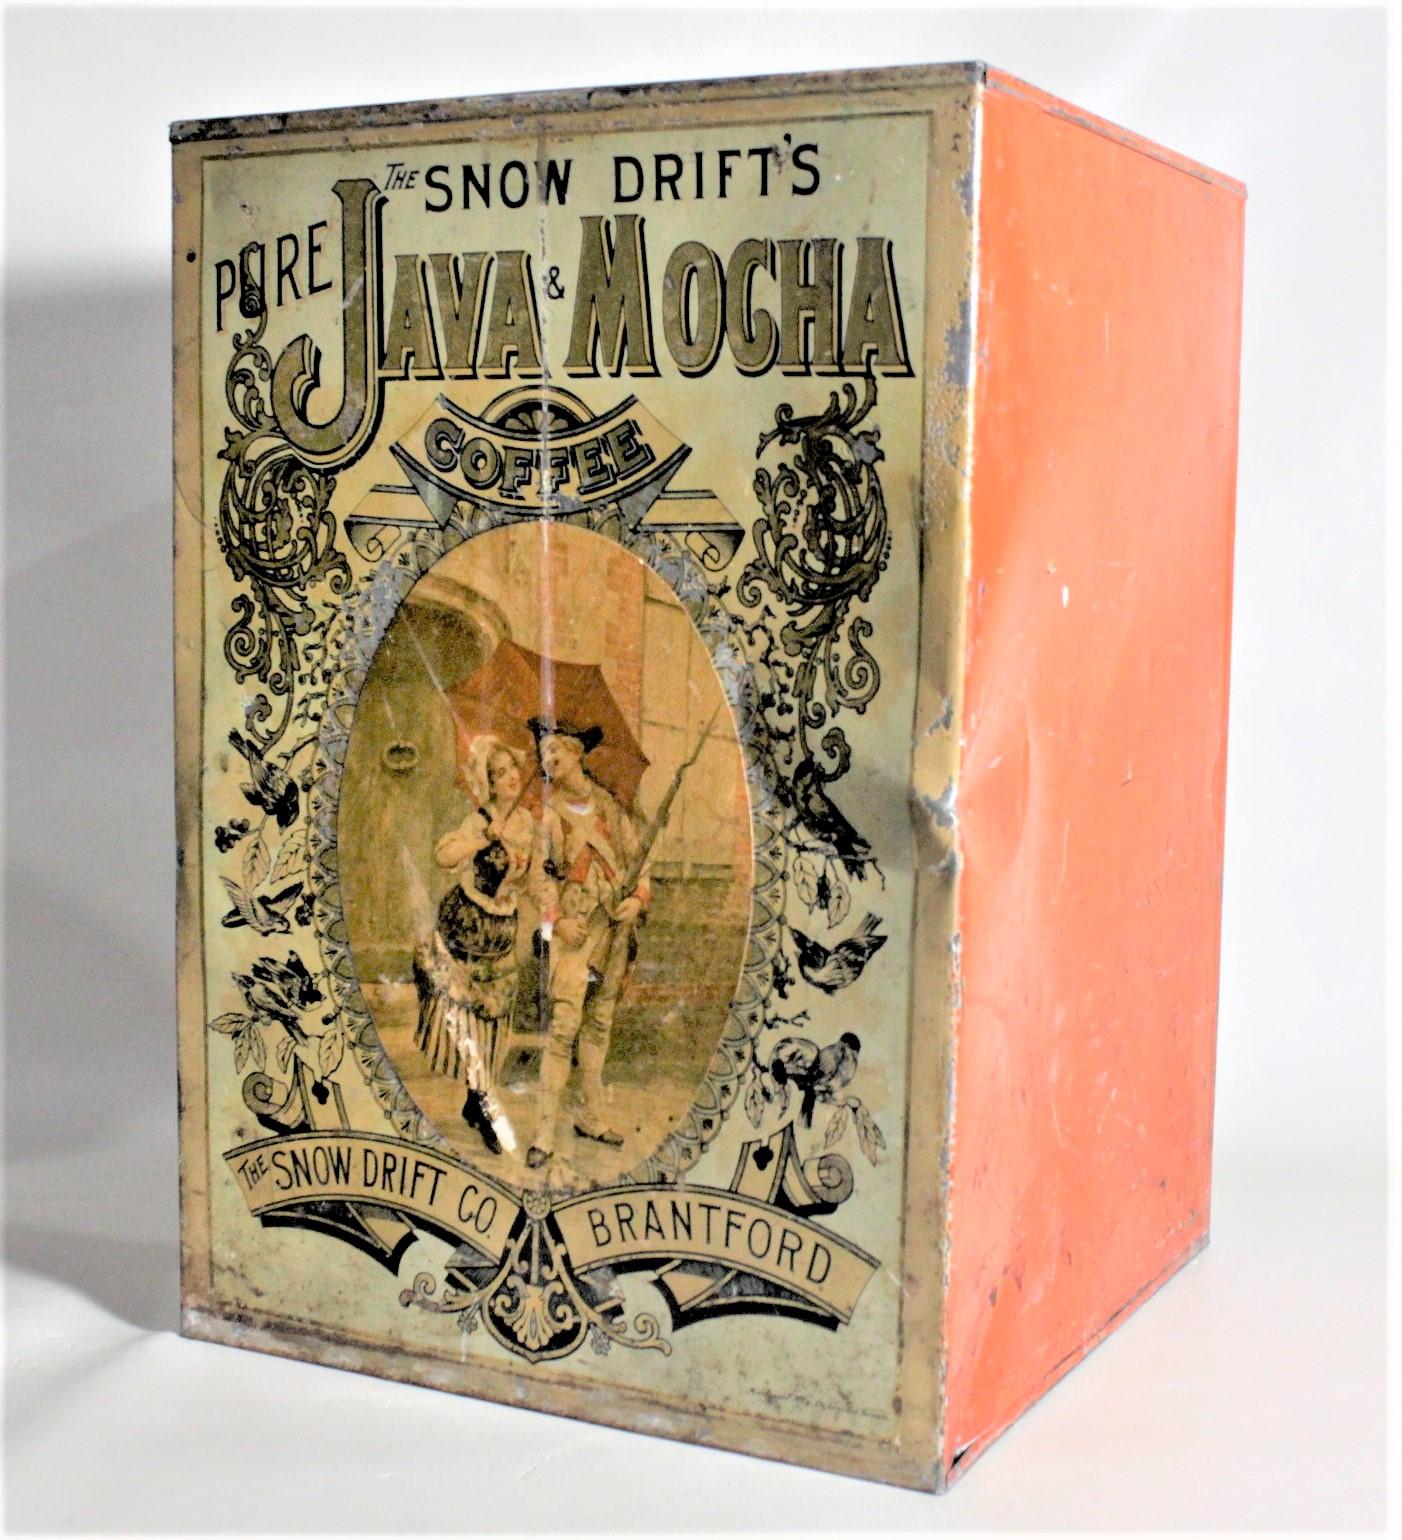 Antique Canadian General Store Snow Drift Mocha Coffee Advertising Display Tin For Sale 4